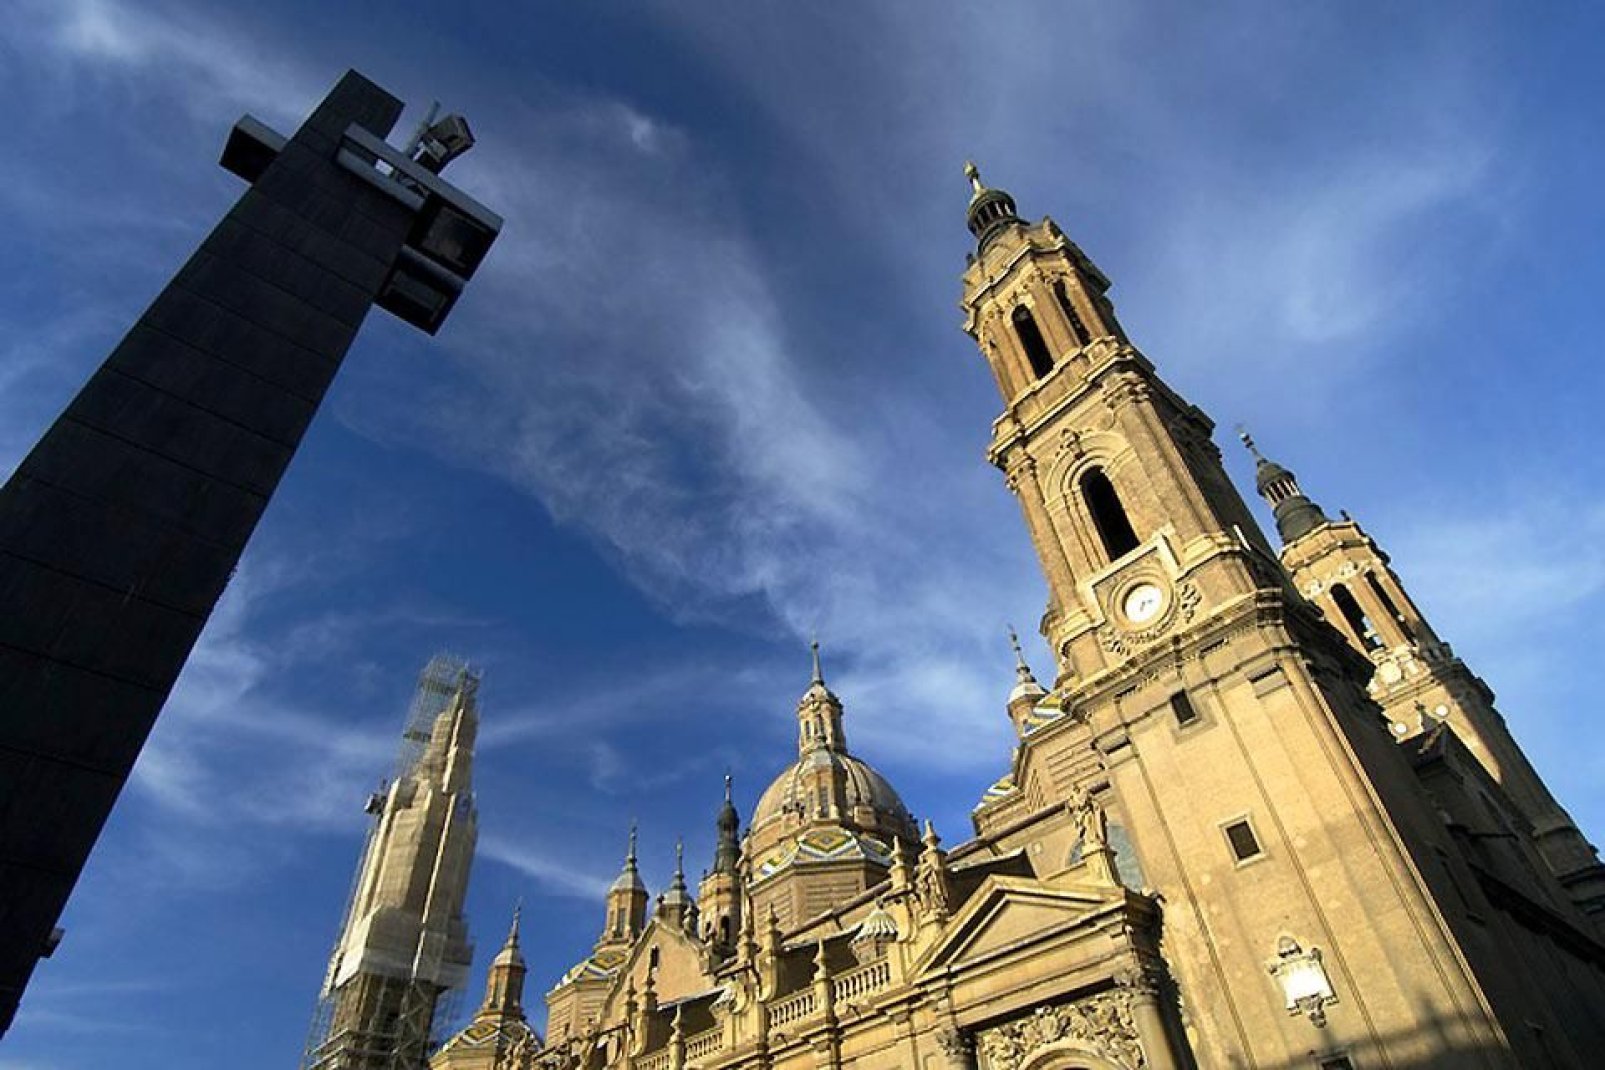 With its three towers, the basilica dominates the view of the city